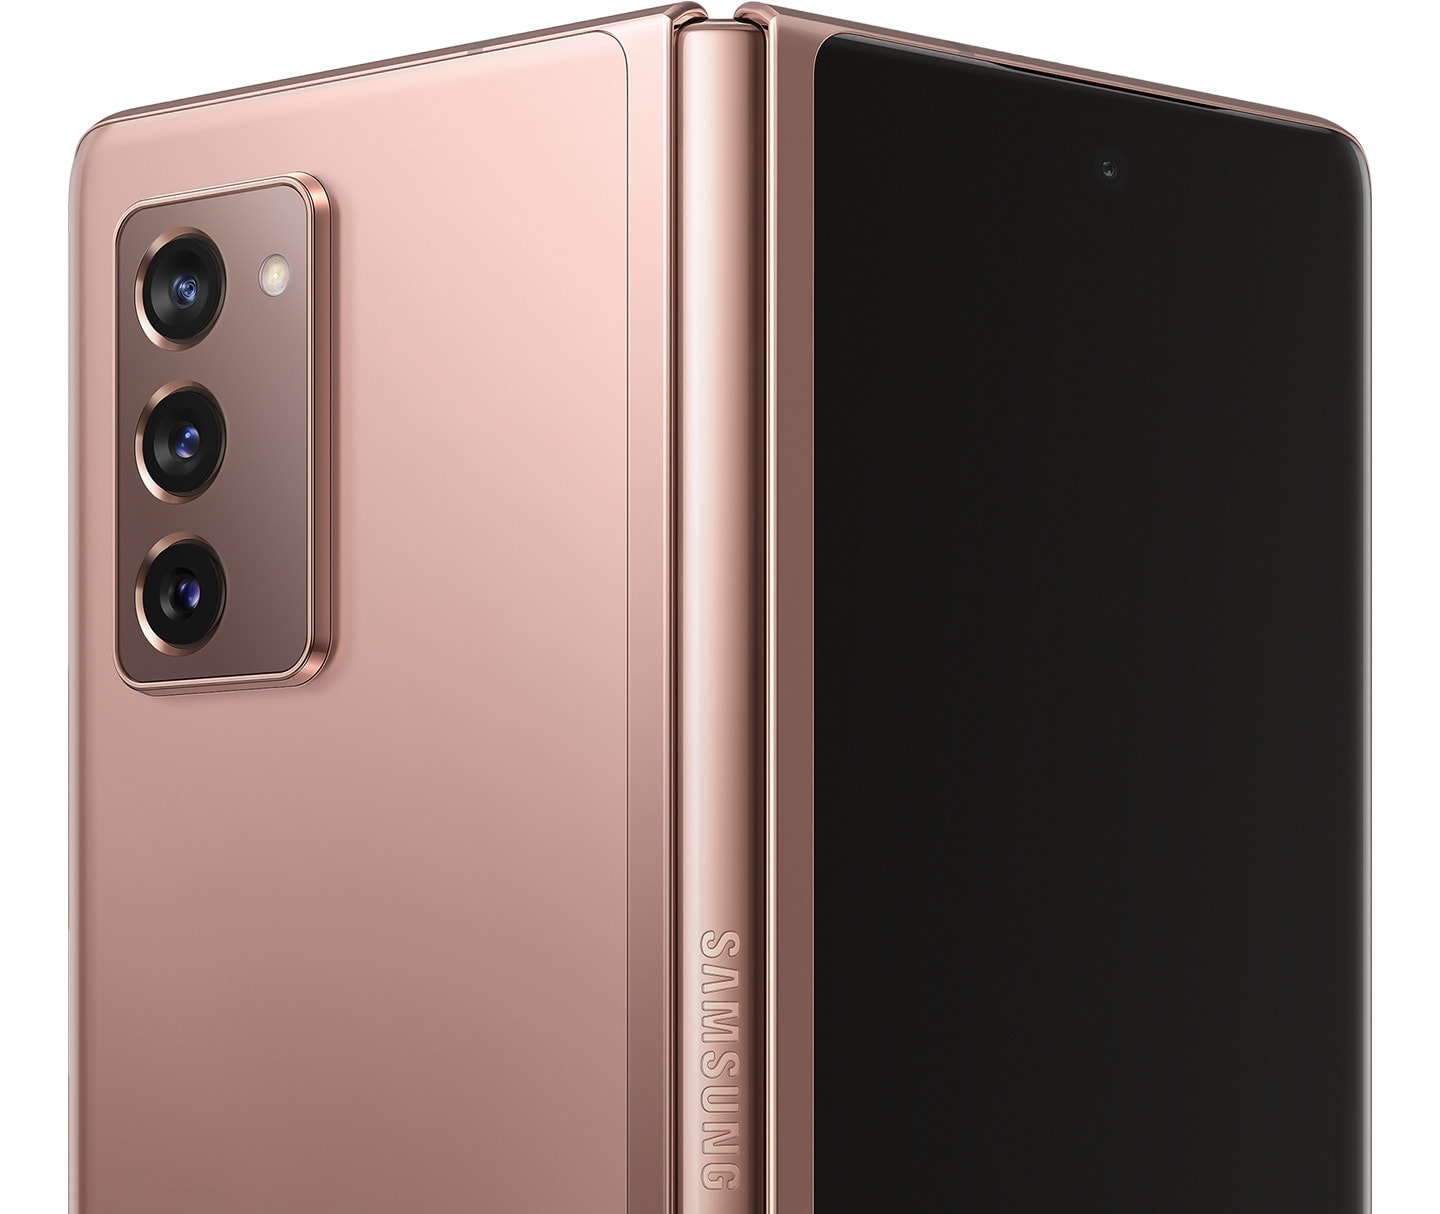 Galaxy Z Fold2 in Mystic Bronze, half unfolded and seen from the rear to show the Hideaway Hinge.